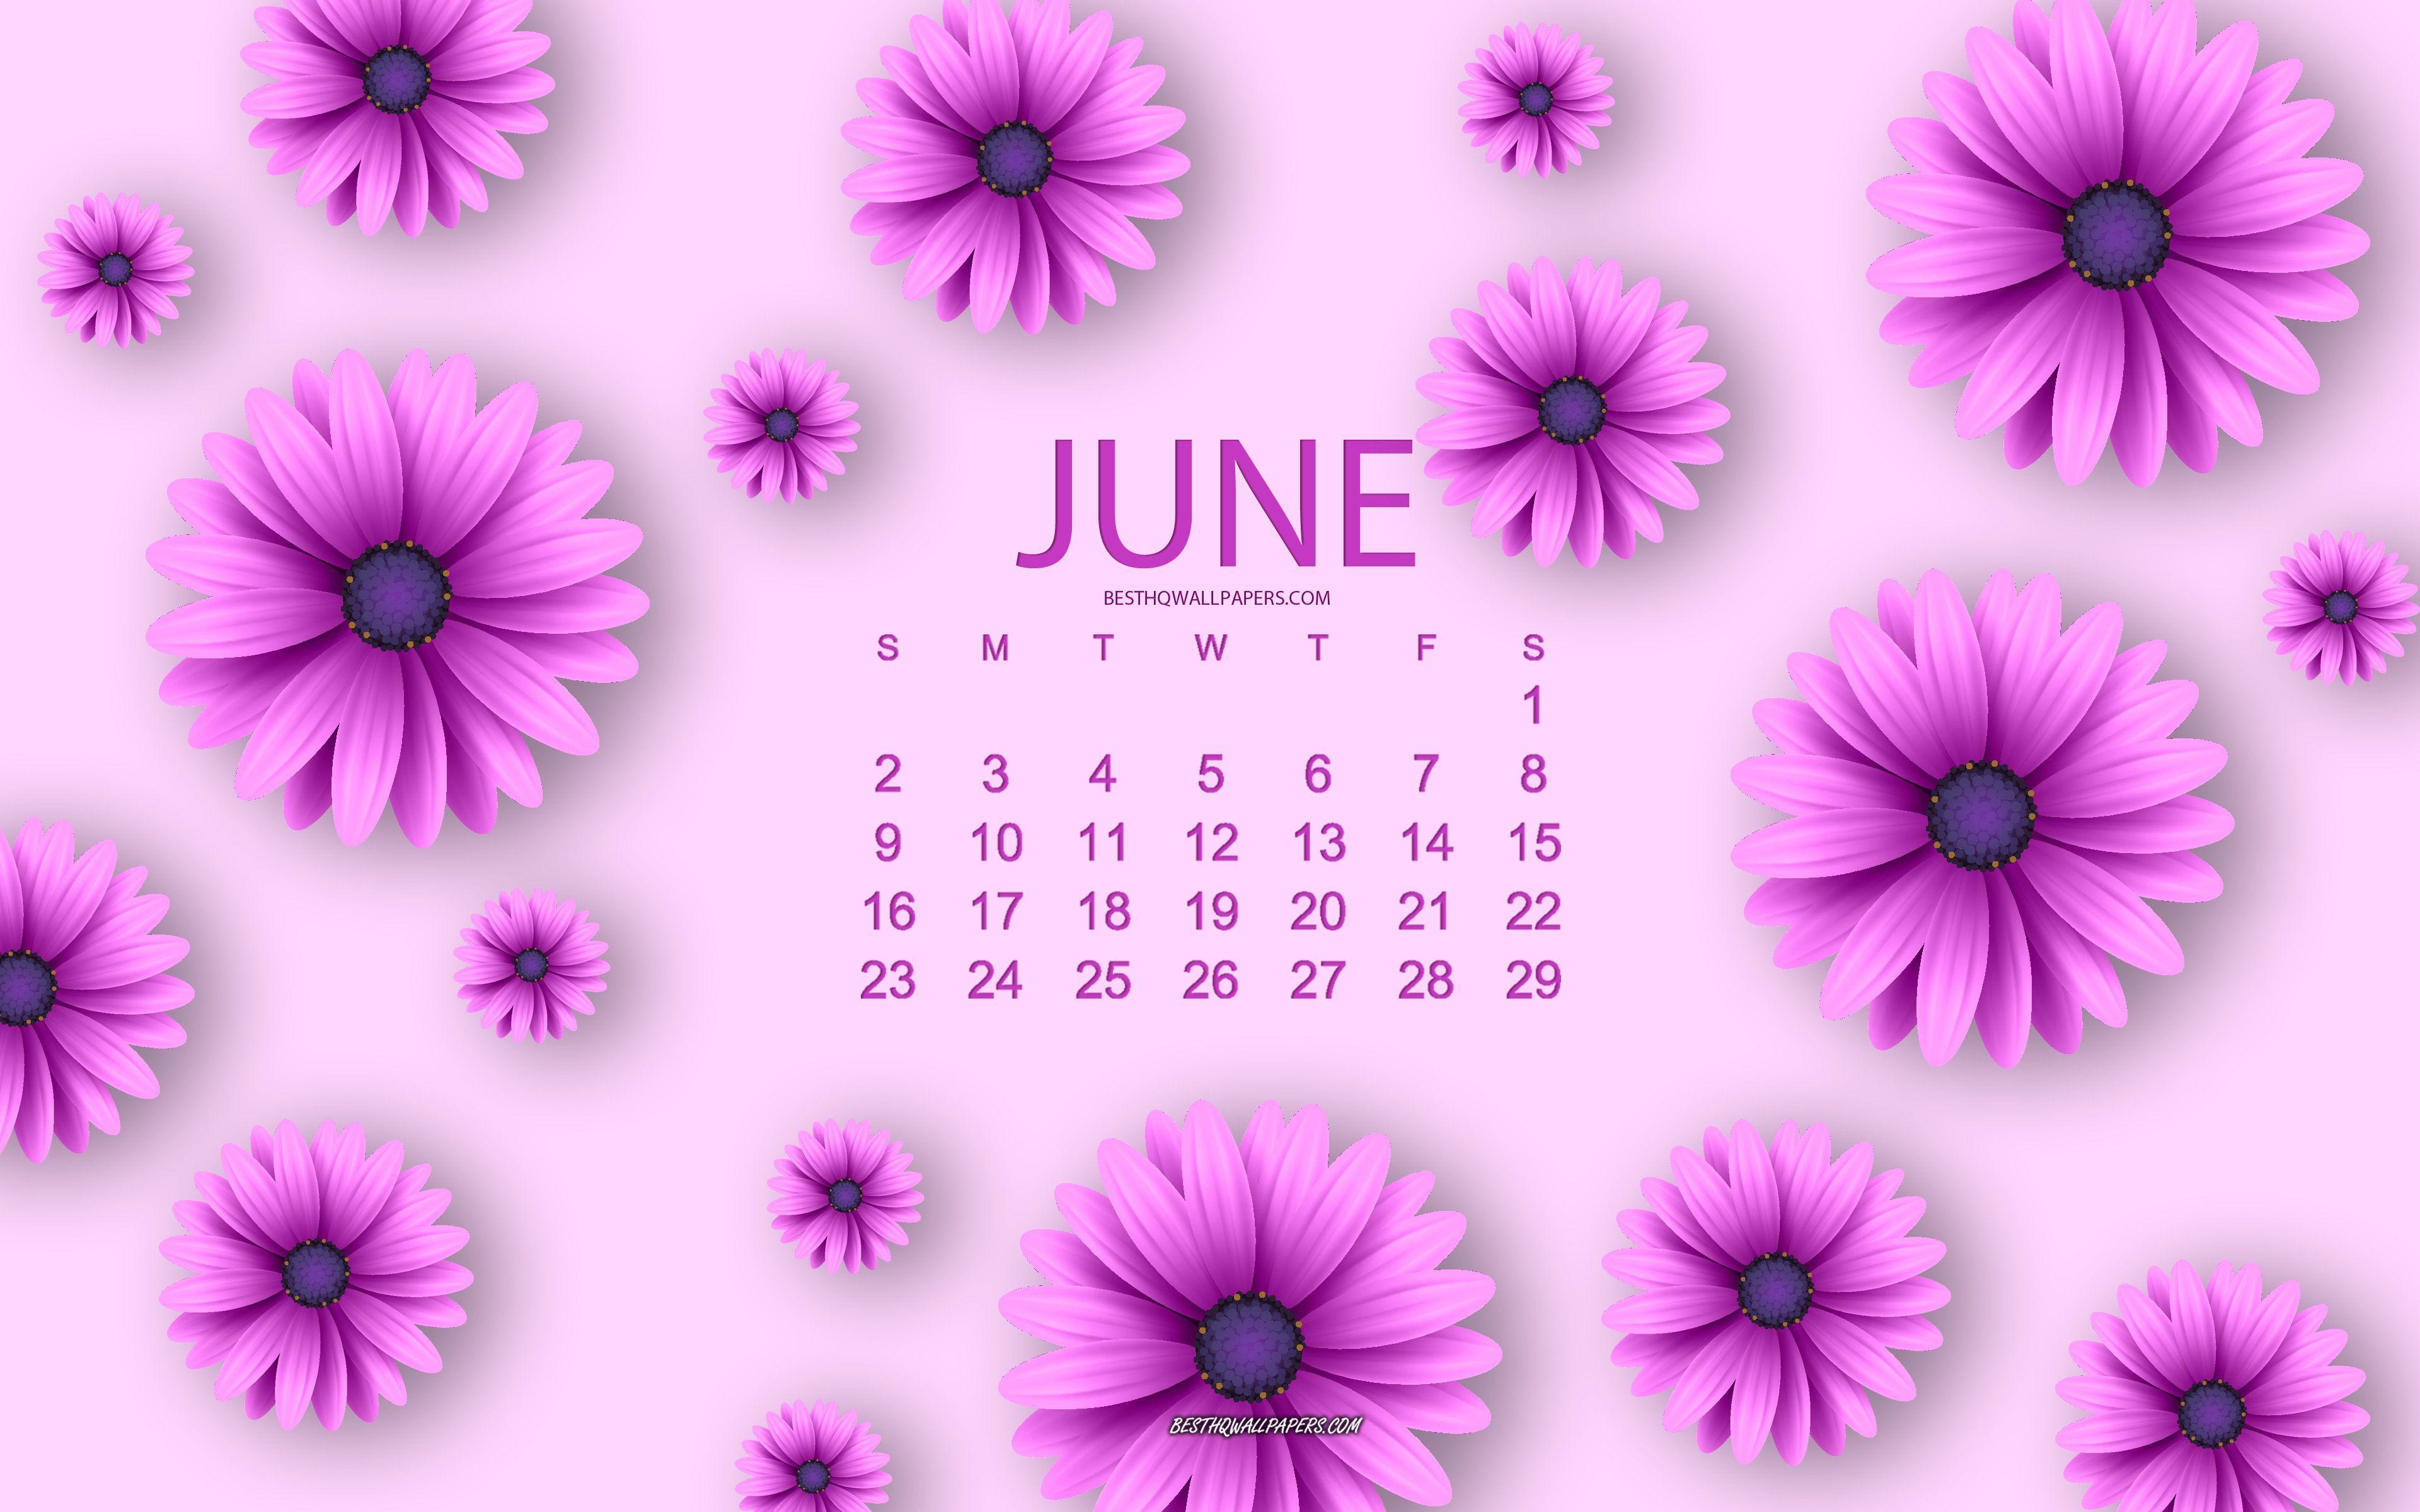 Discover 64+ wallpapers for june latest in.cdgdbentre